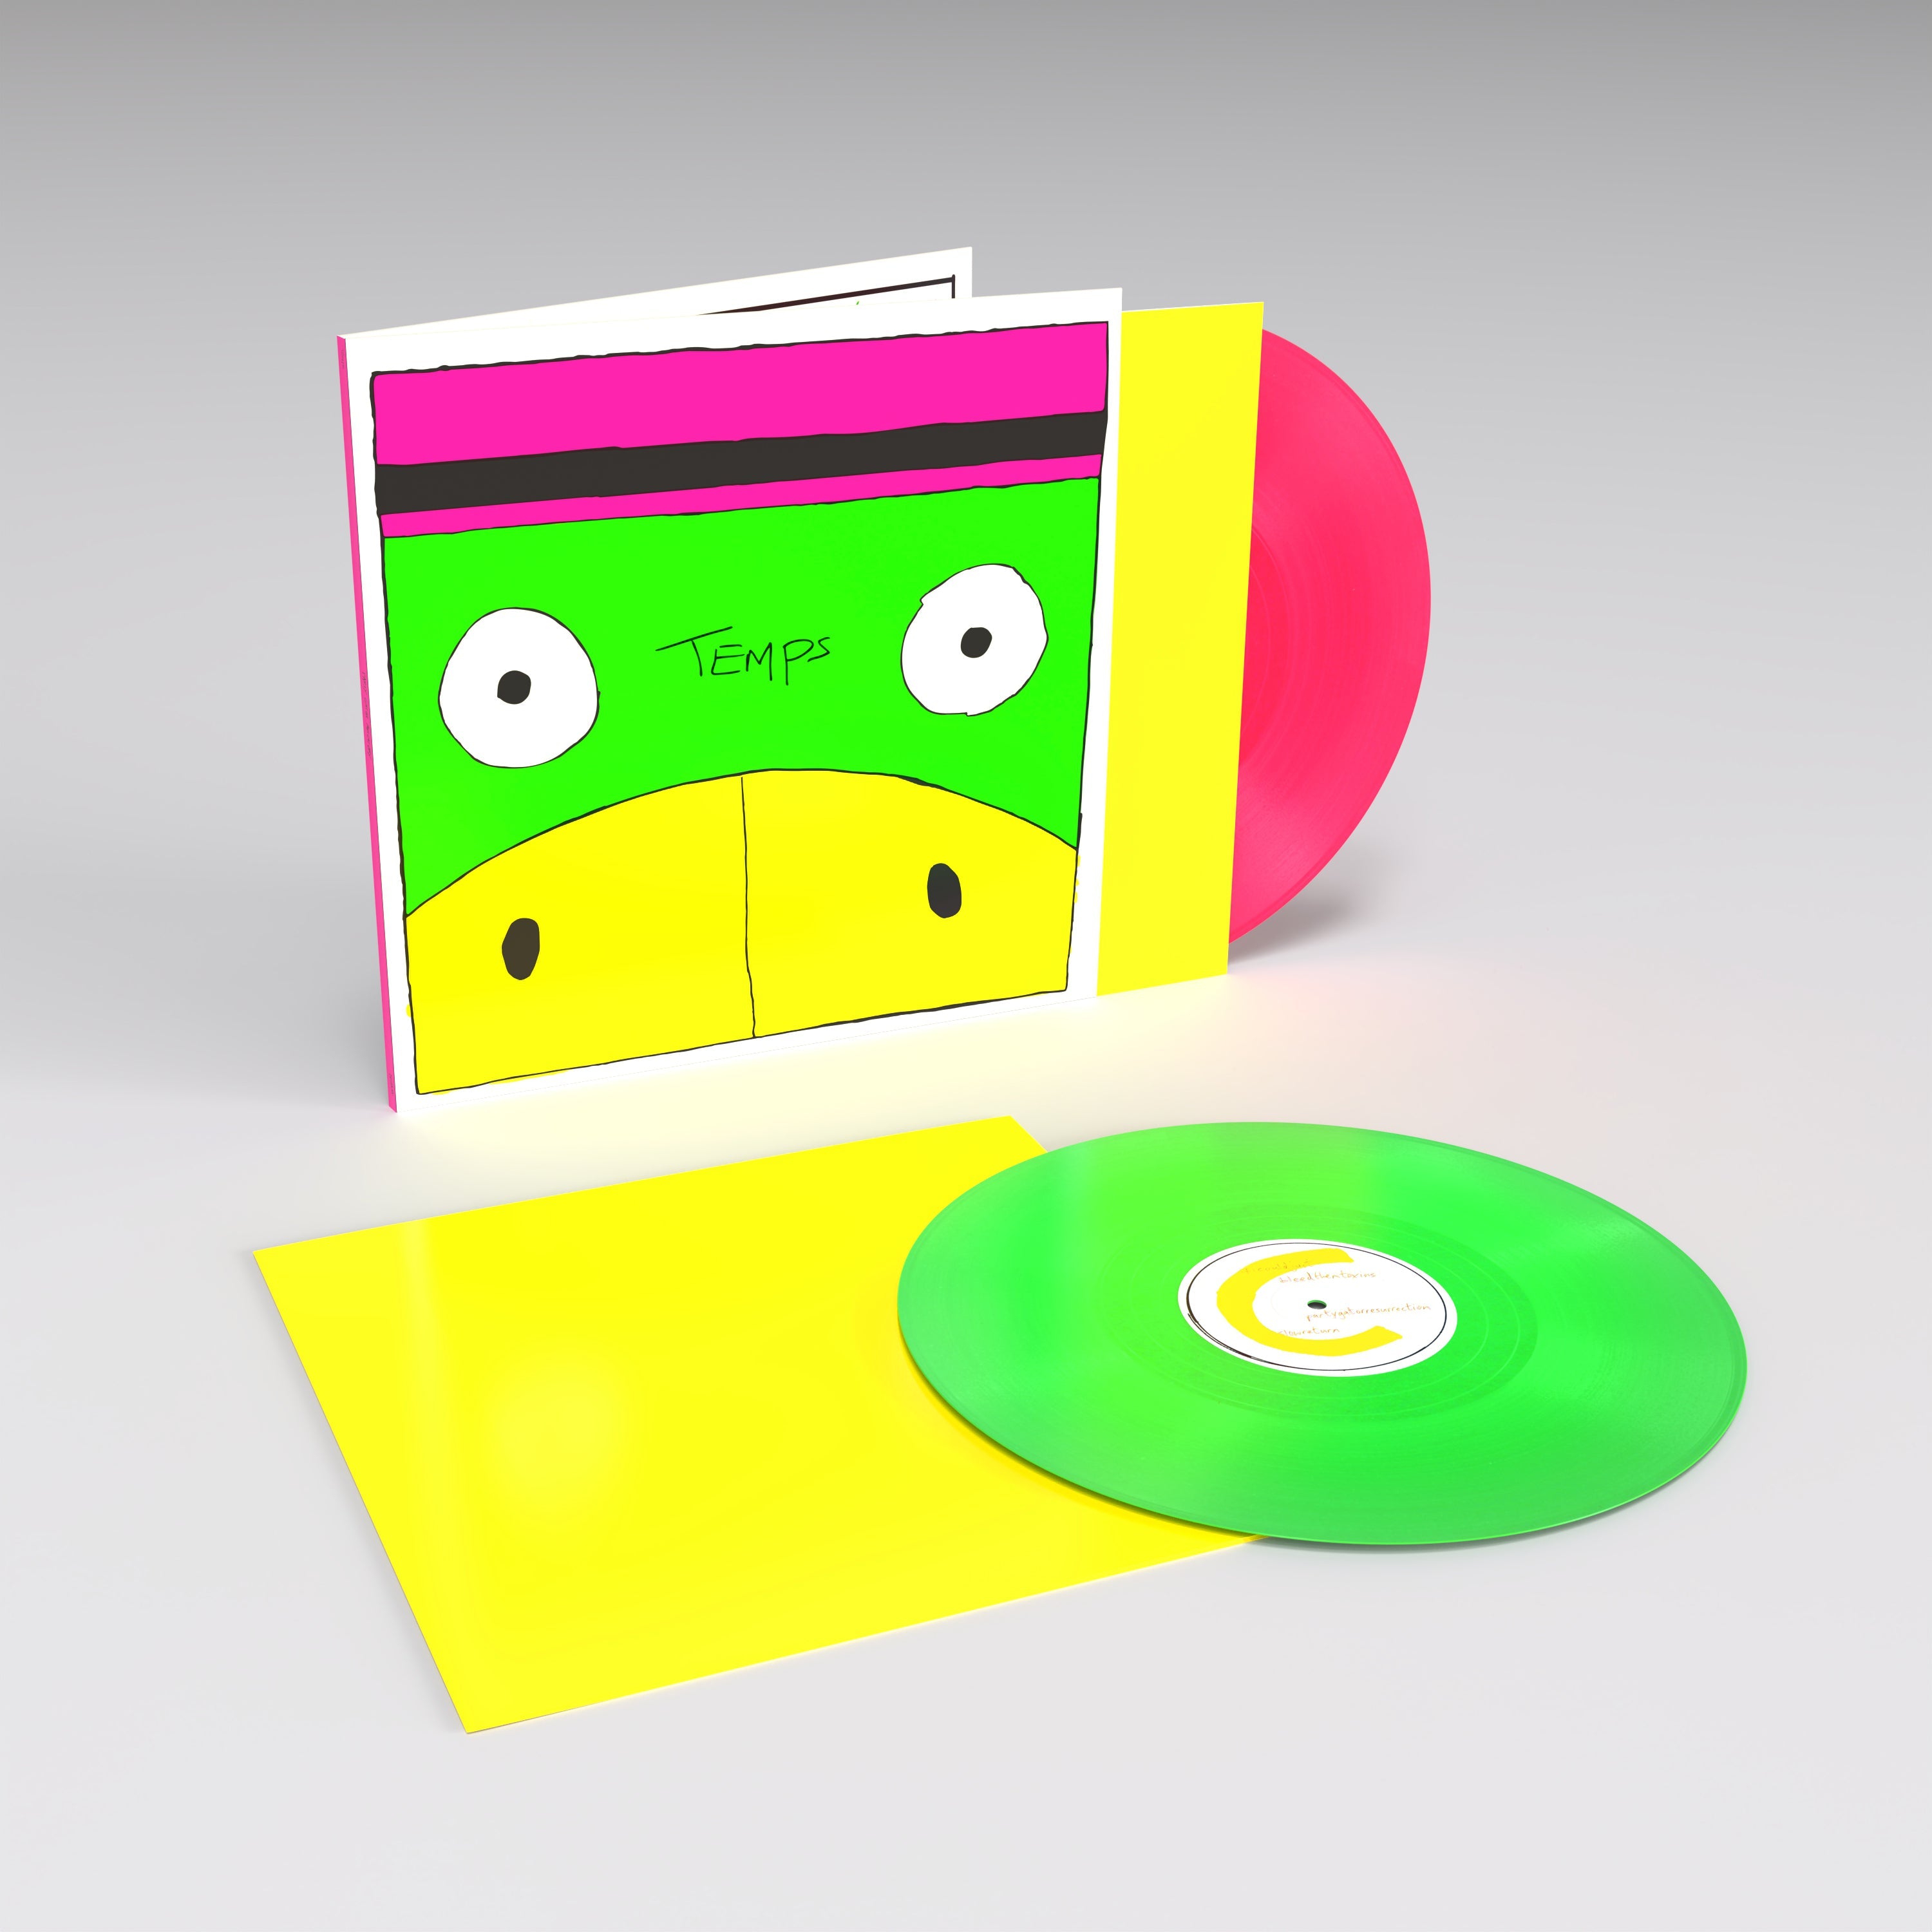 Party Gator Purgatory: Limited Neon Pink & Neon Green Vinyl 2LP + Signed Print [by James Acaster]